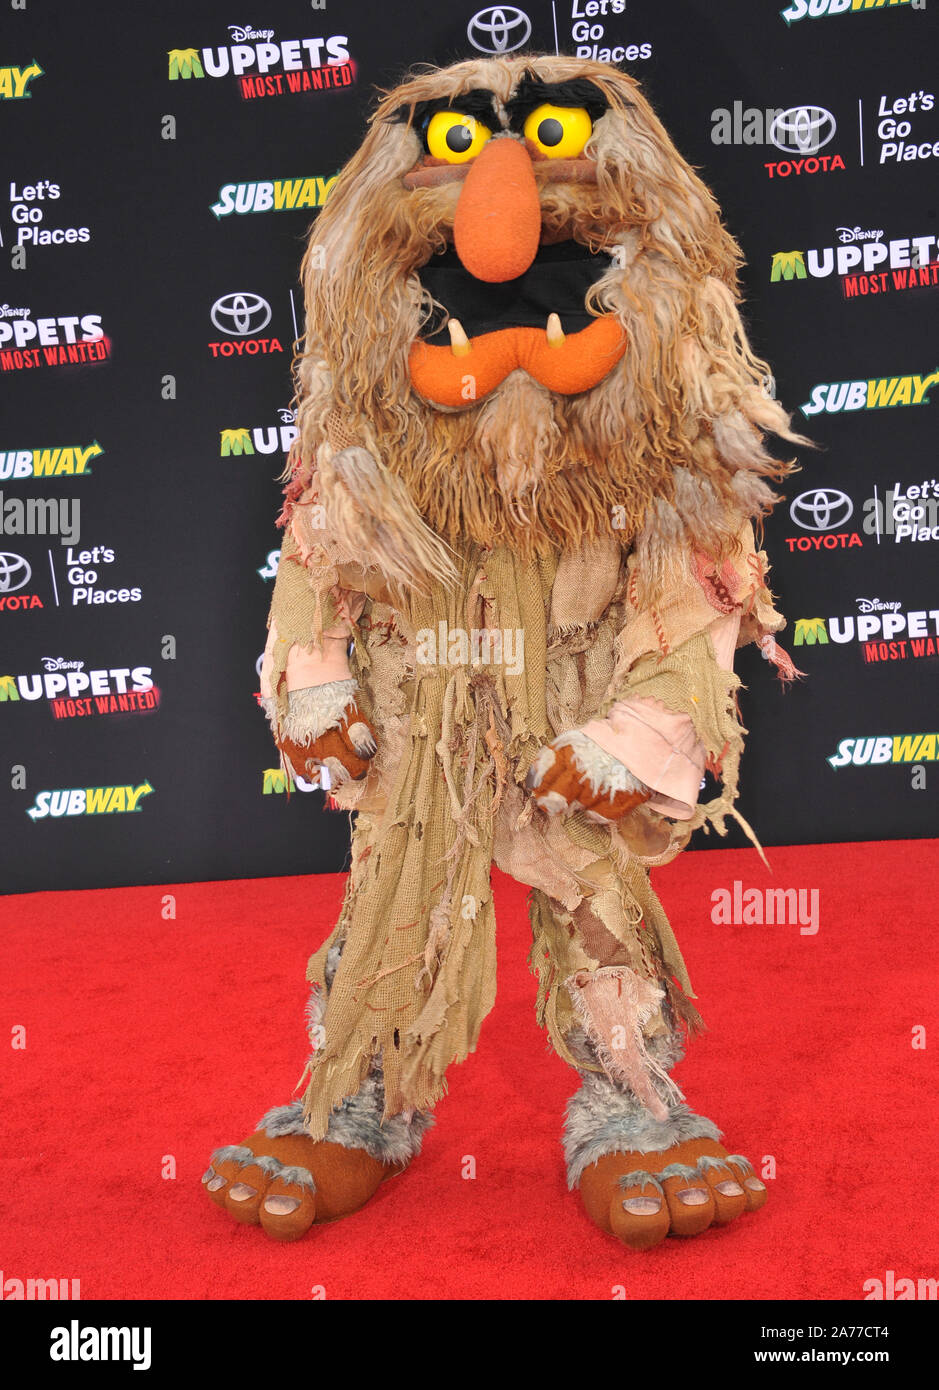 LOS ANGELES, CA - MARCH 11, 2014: Muppets' character Sweetums at the world premiere of her movie Disney's 'Muppets Most Wanted' at the El Capitan Theatre, Hollywood. © 2014 Paul Smith / Featureflash Stock Photo